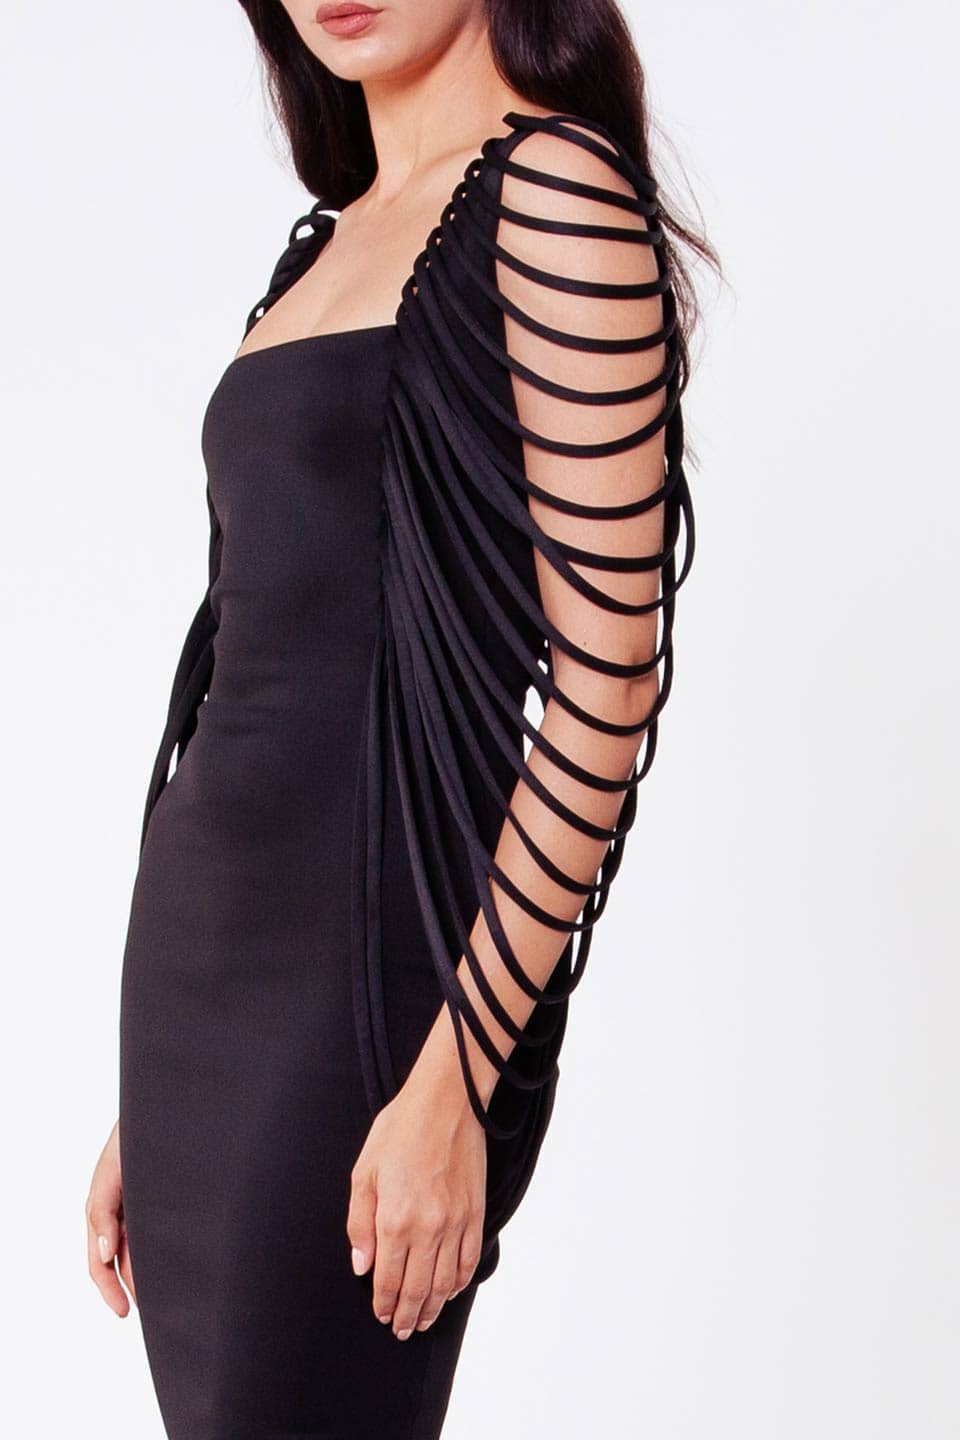 Fashion designer maxi dress with fringe sleeves. Special occasion dress in black color.